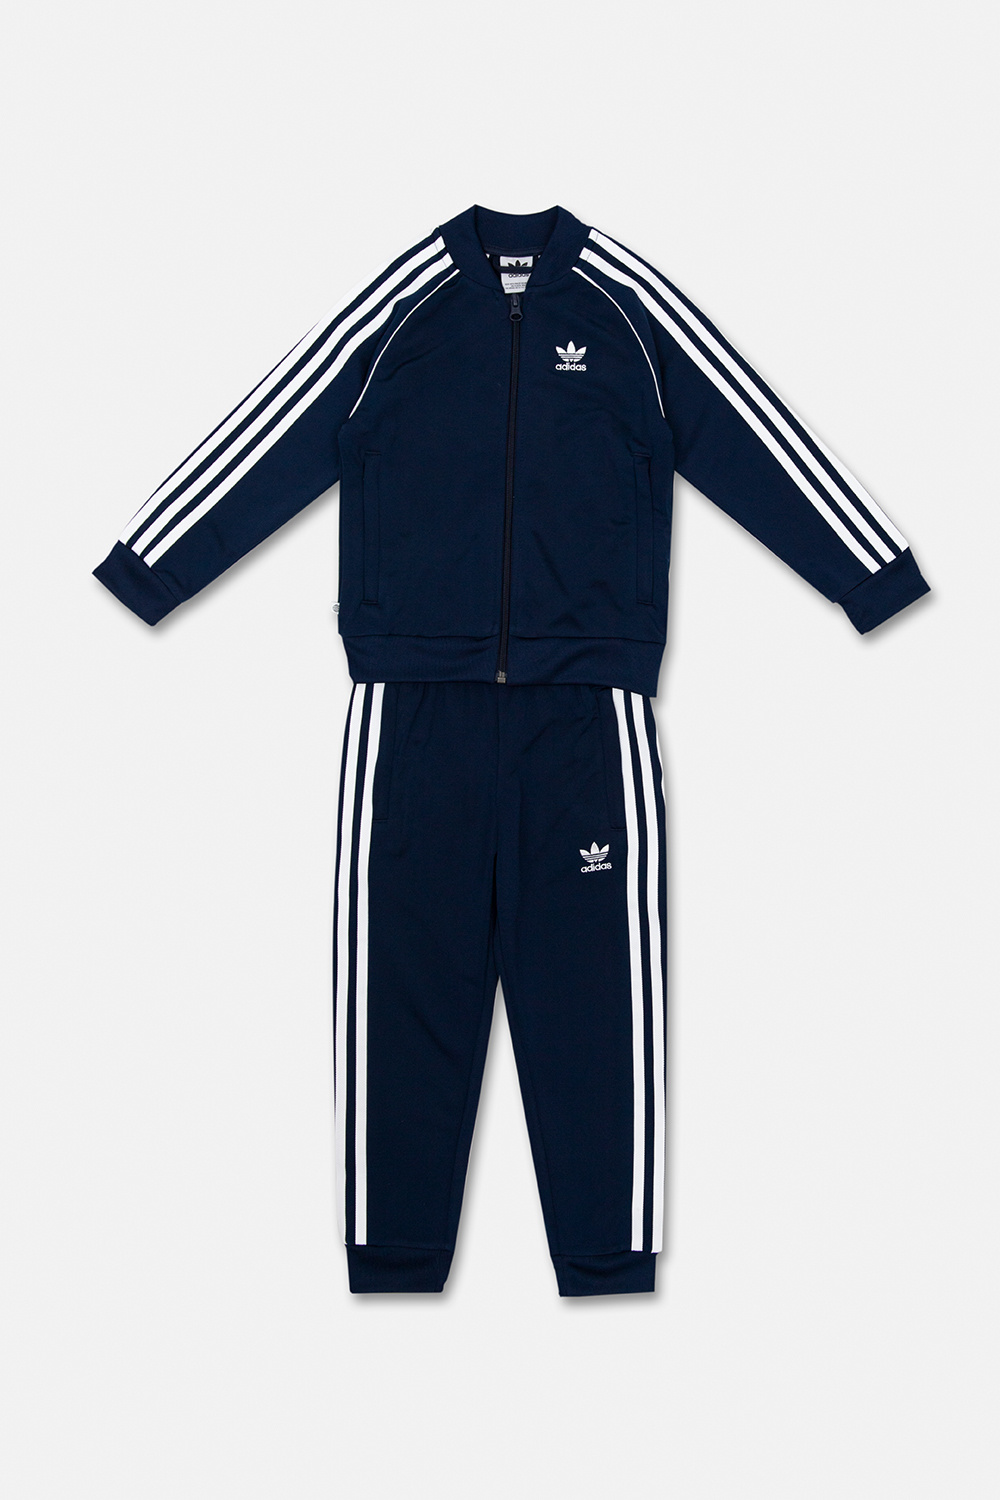 ADIDAS Kids Branded track suit | Kids's Boys clothes (4-14 years) | Vitkac